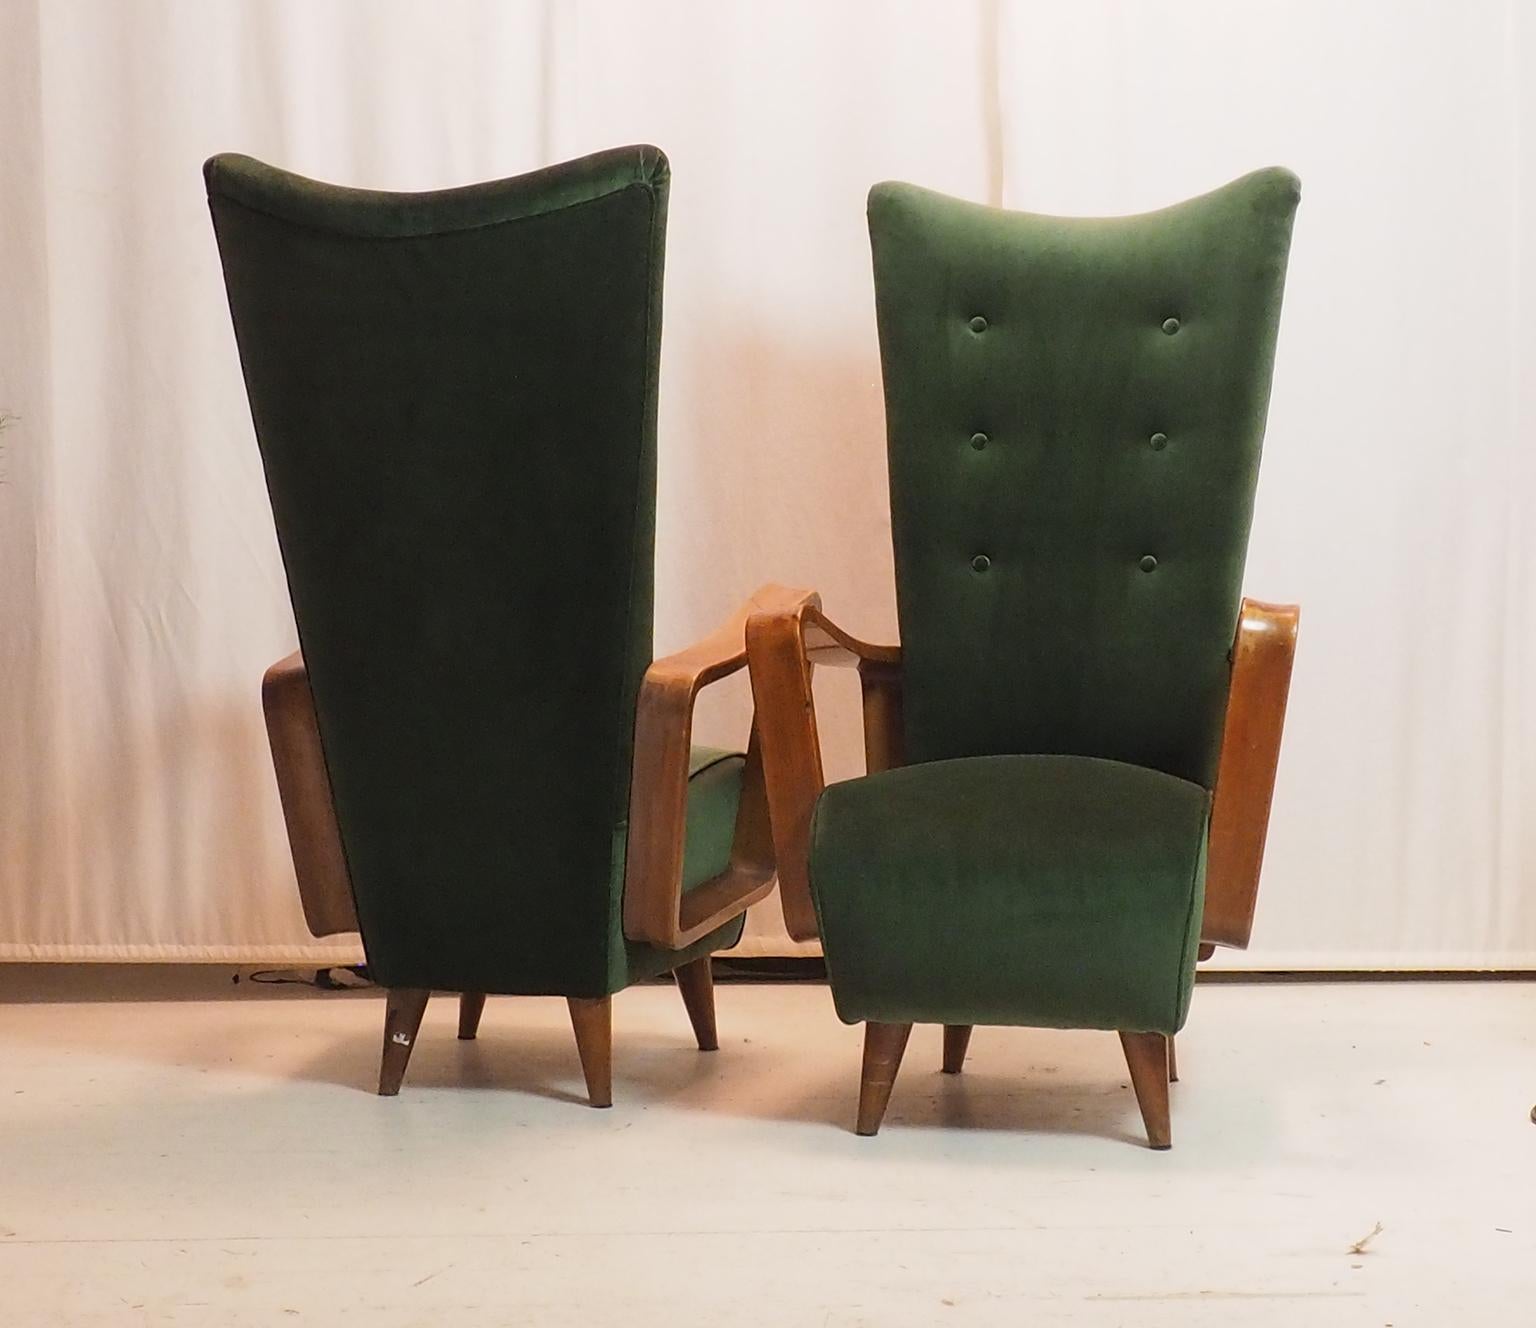 Midcentury High Back Italian Green Armchairs by Pietro Lingeri, Italy 1950s For Sale 1